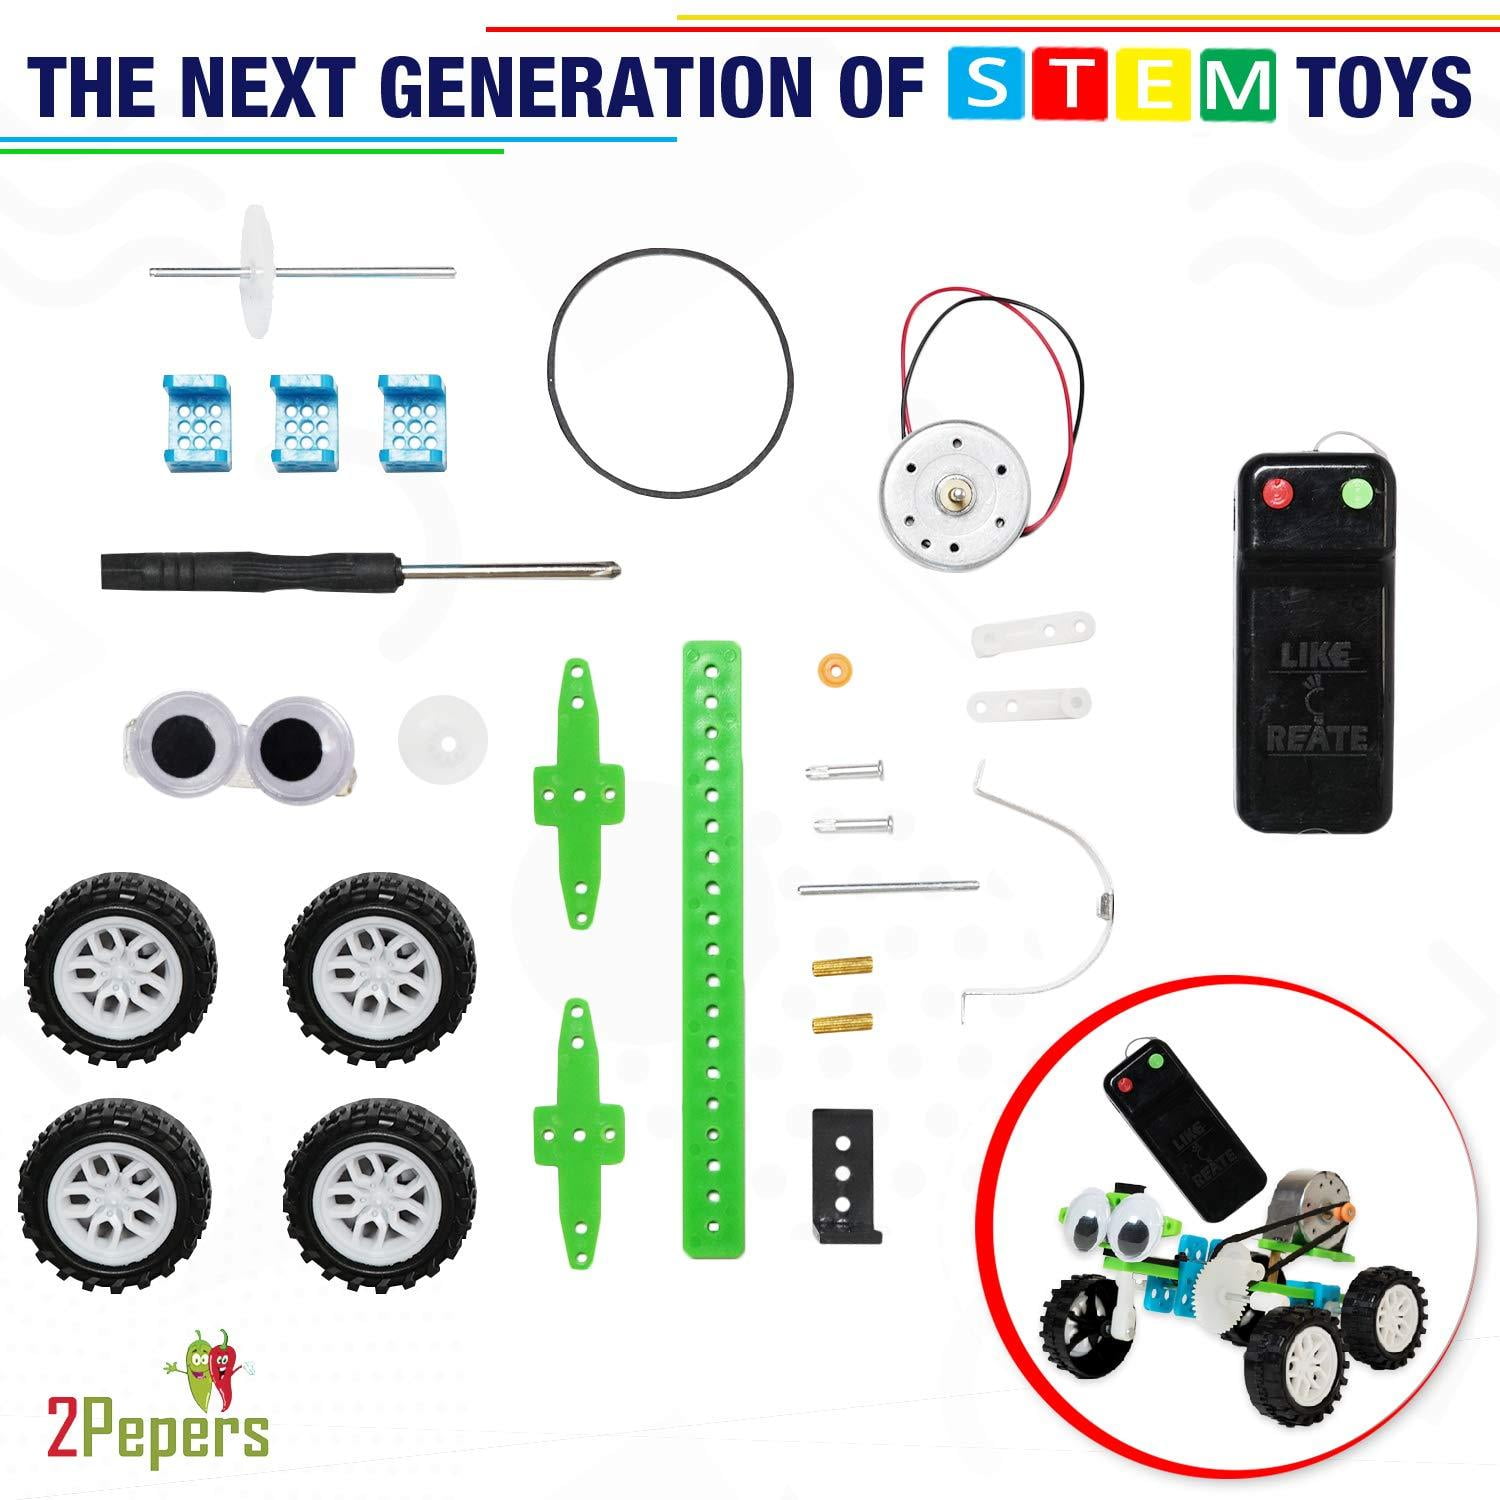 2pepers Electric Motor Robotic Science Kits for Kids4 in 1diy Stem Toys Kids for sale online 